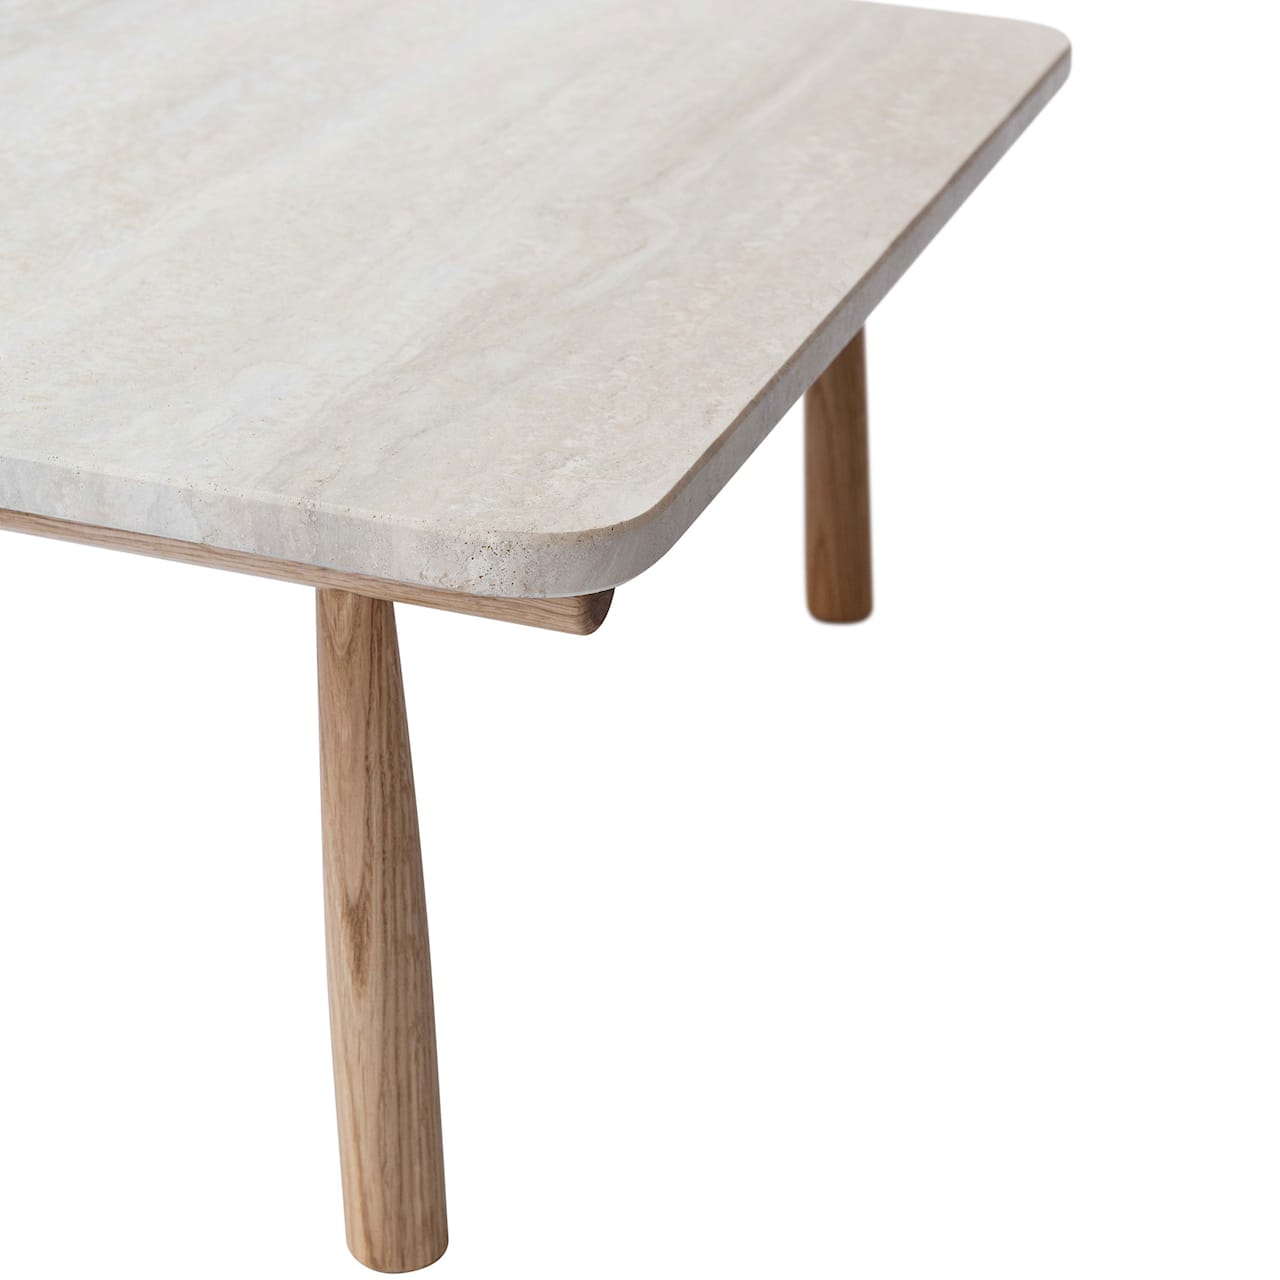 Domus Table